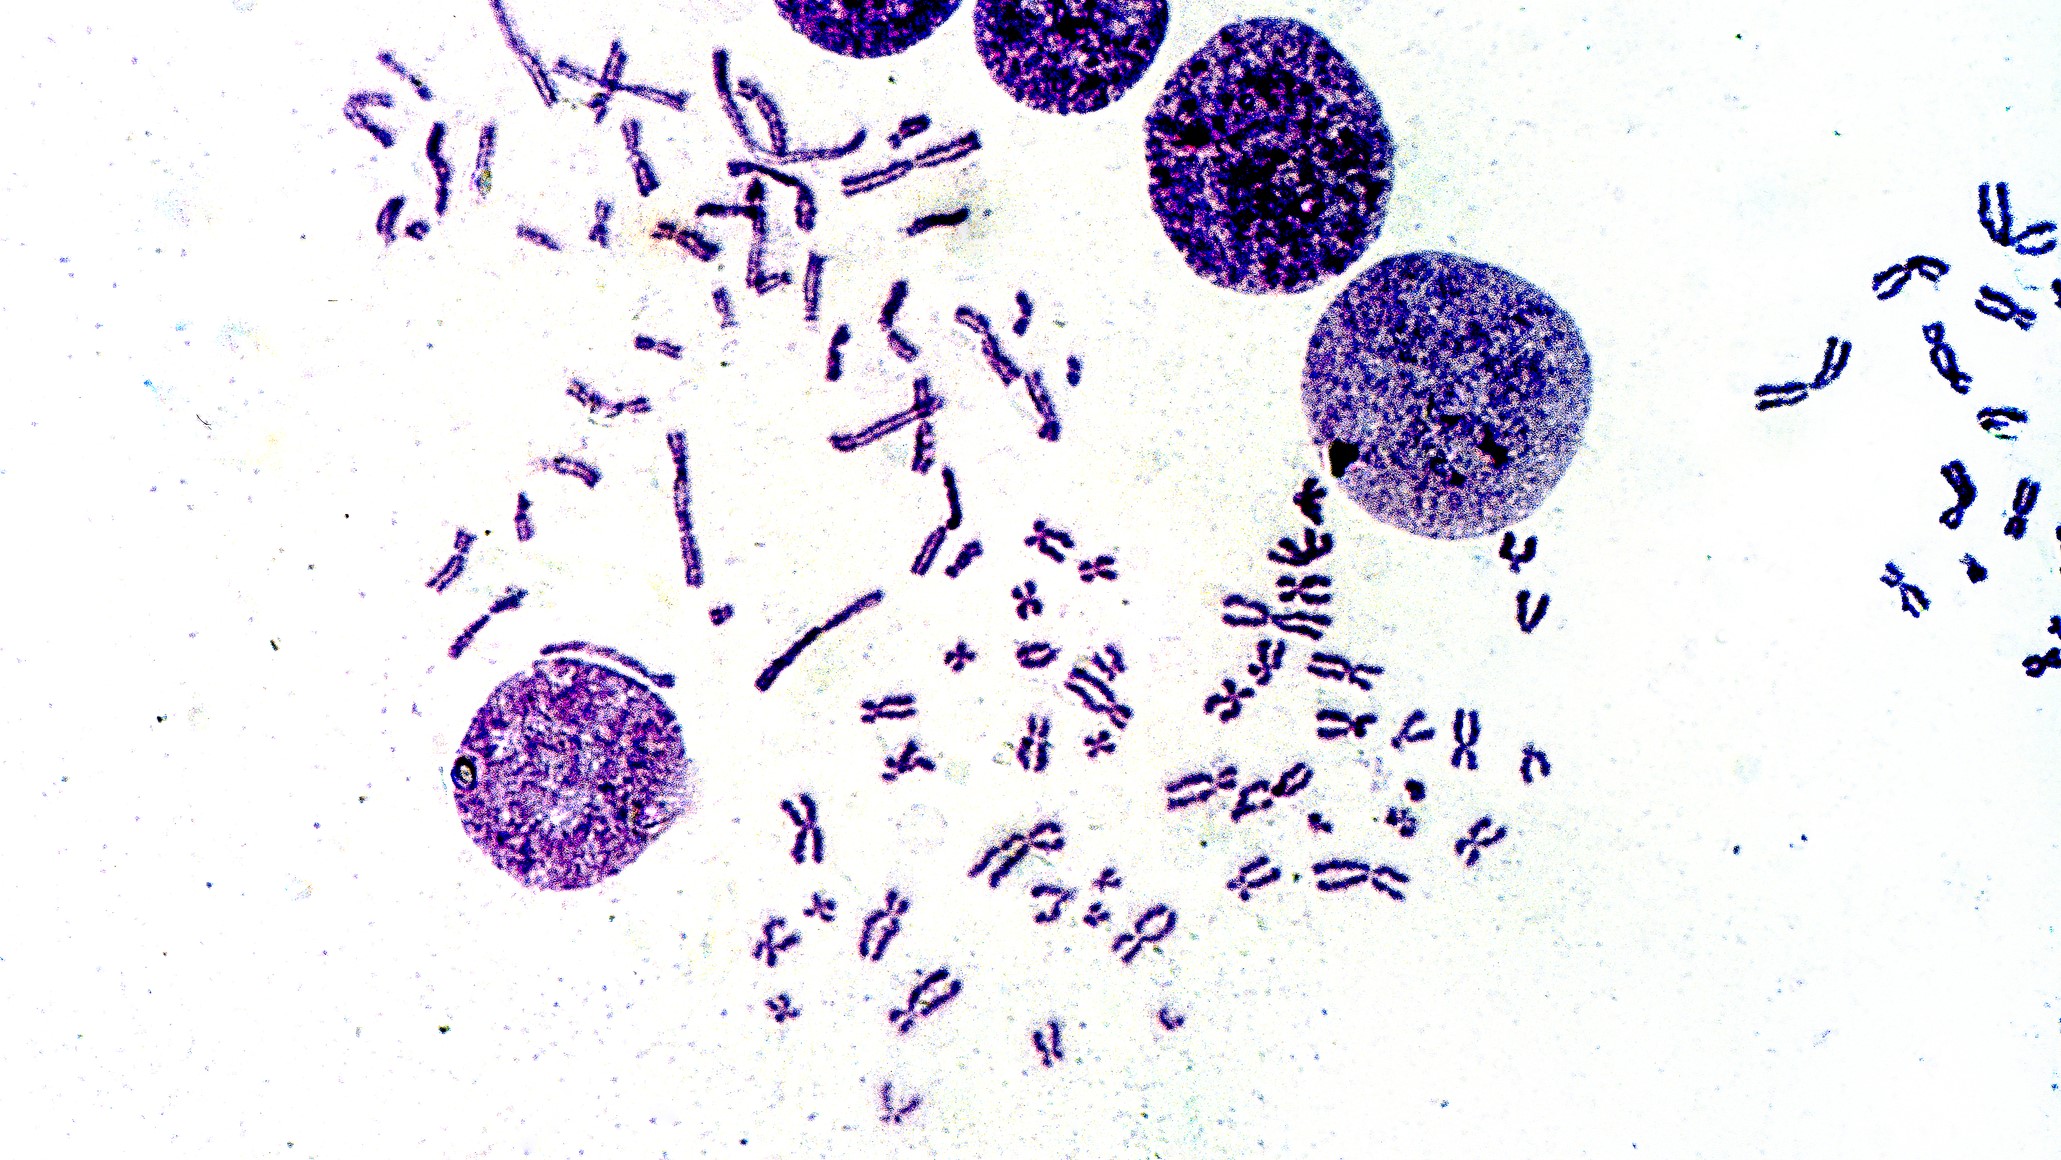 Chromosomes can be visible through a strong microscope when a stain is applied. The term chromosome comes from the Greek words for color (chroma) and body (soma) due to their ability to be strongly stained by dyes used in research.